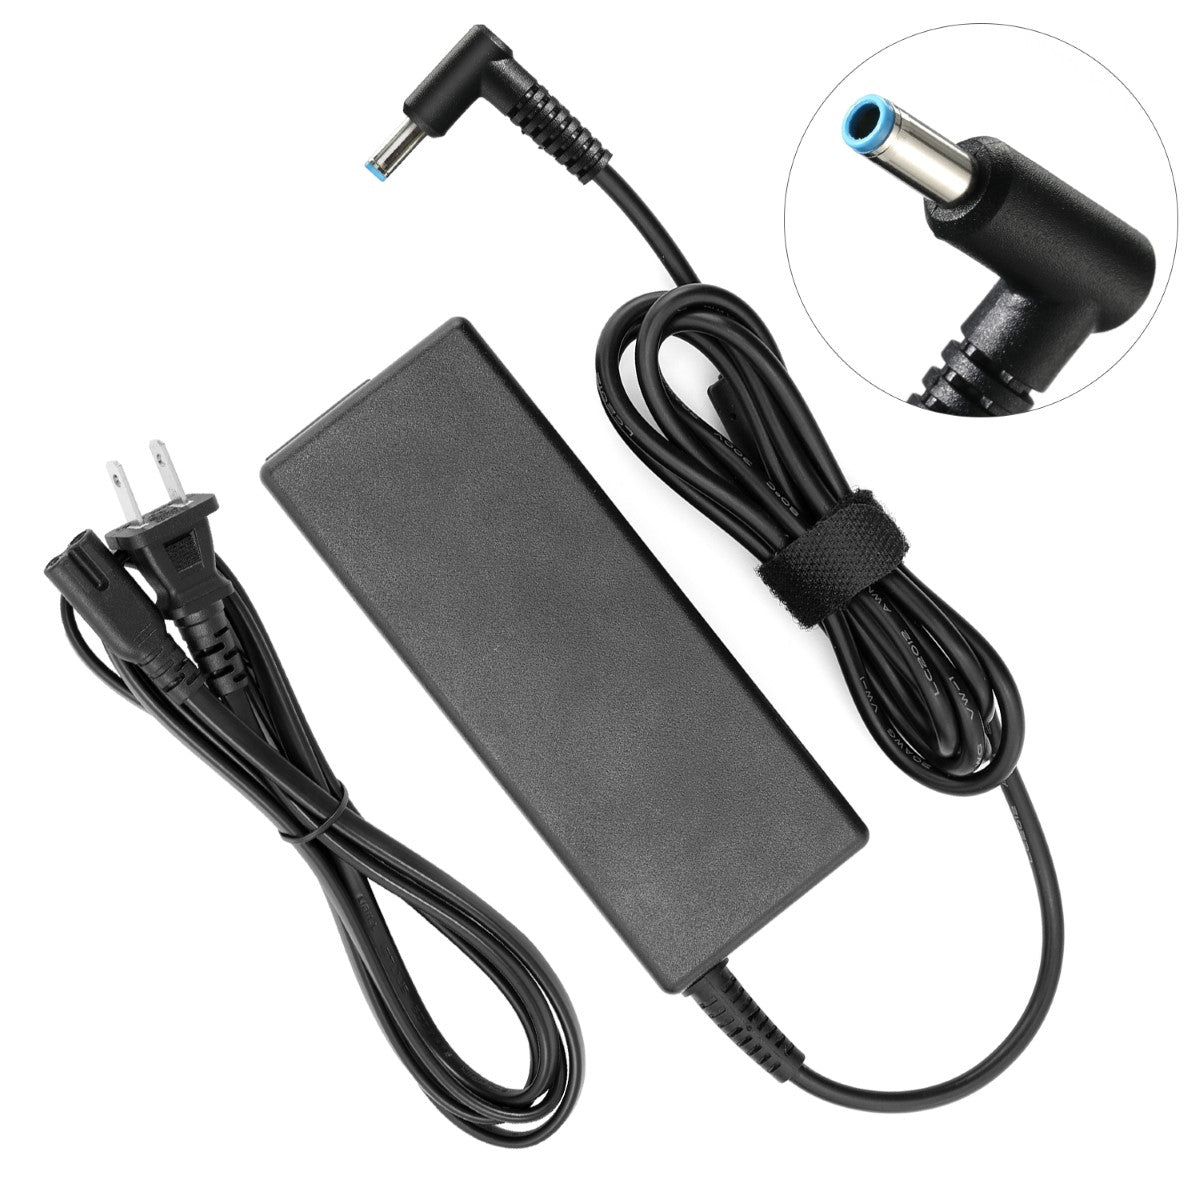 Charger for HP 612 G1 Notebook